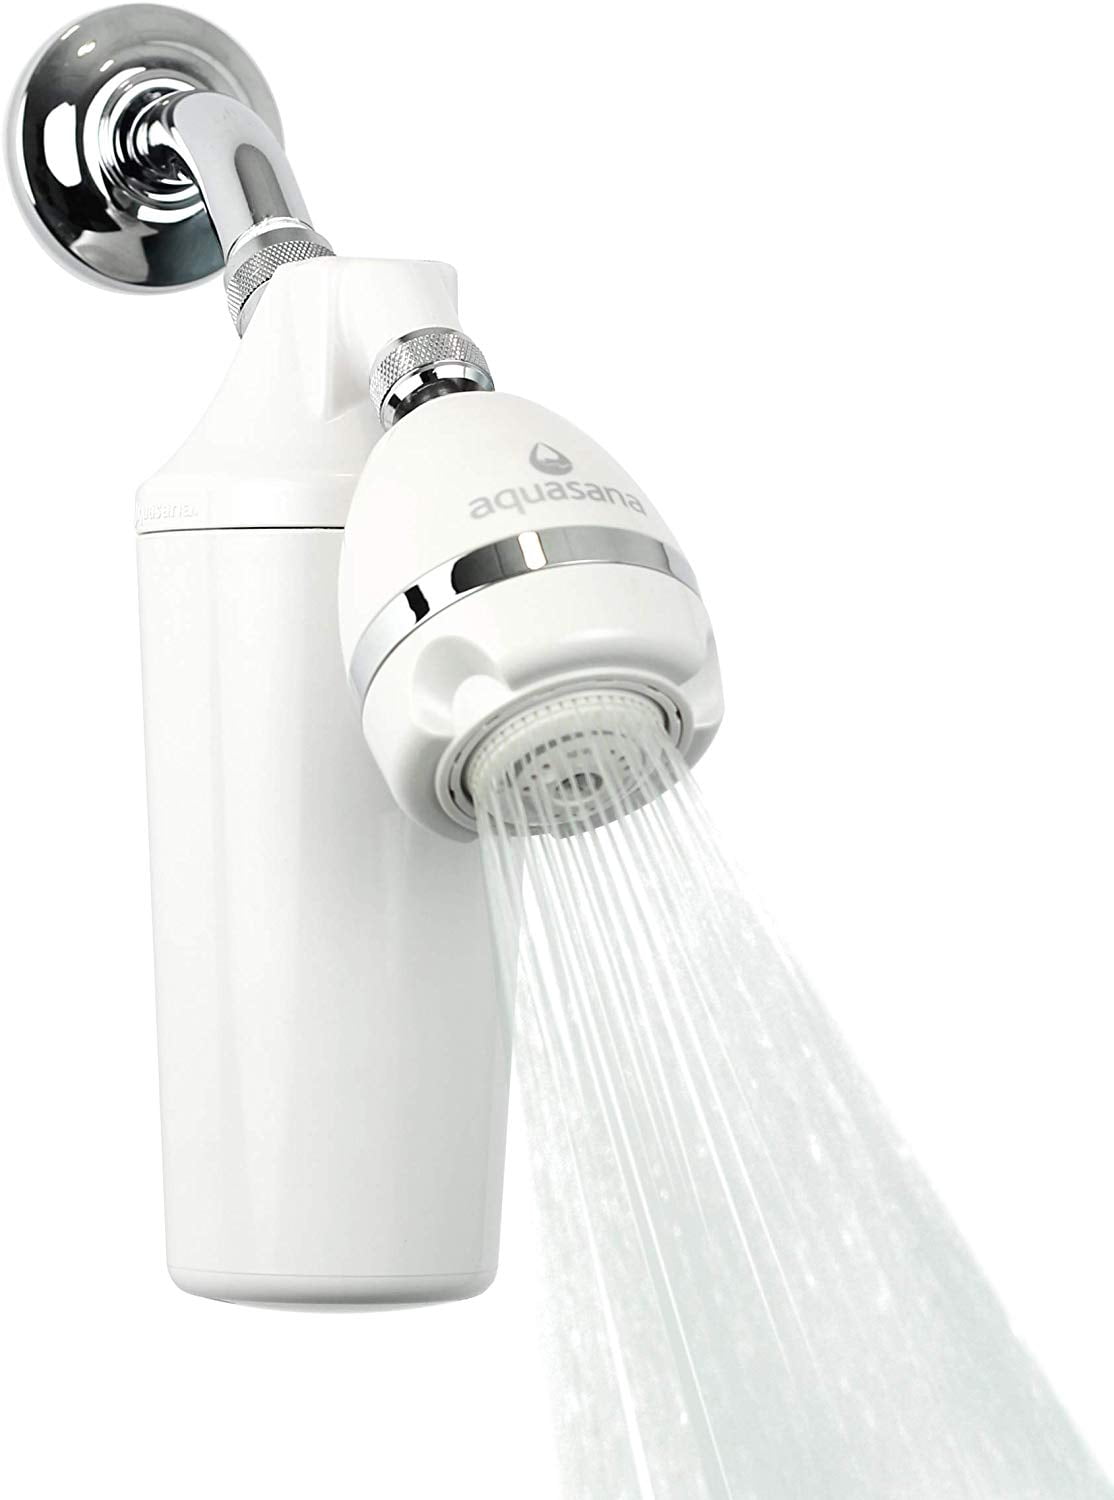 Luxury Filtered Shower Head Set  High Pressure Filtration System For Hard Water 